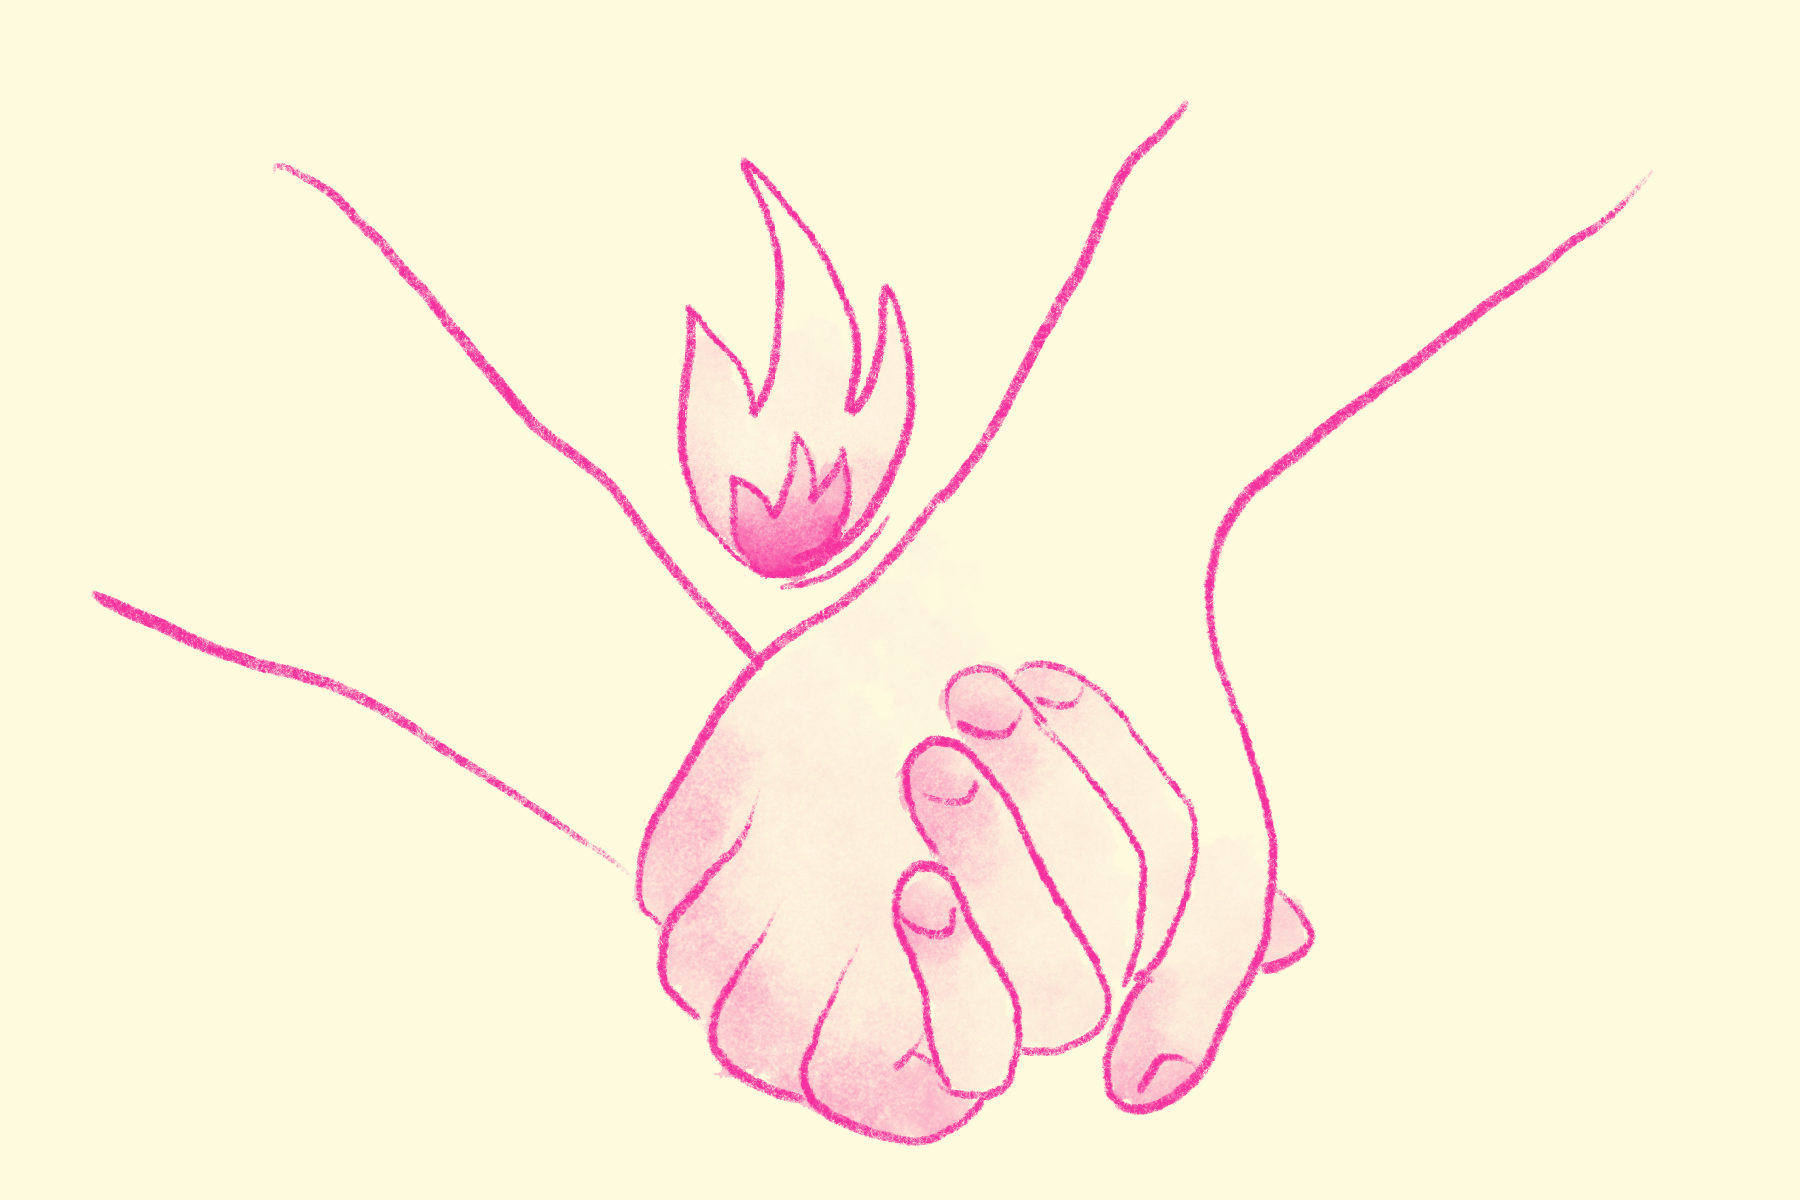 Soulmates, Twin-Flames, Pair-Bonding - Is Any of it Real?